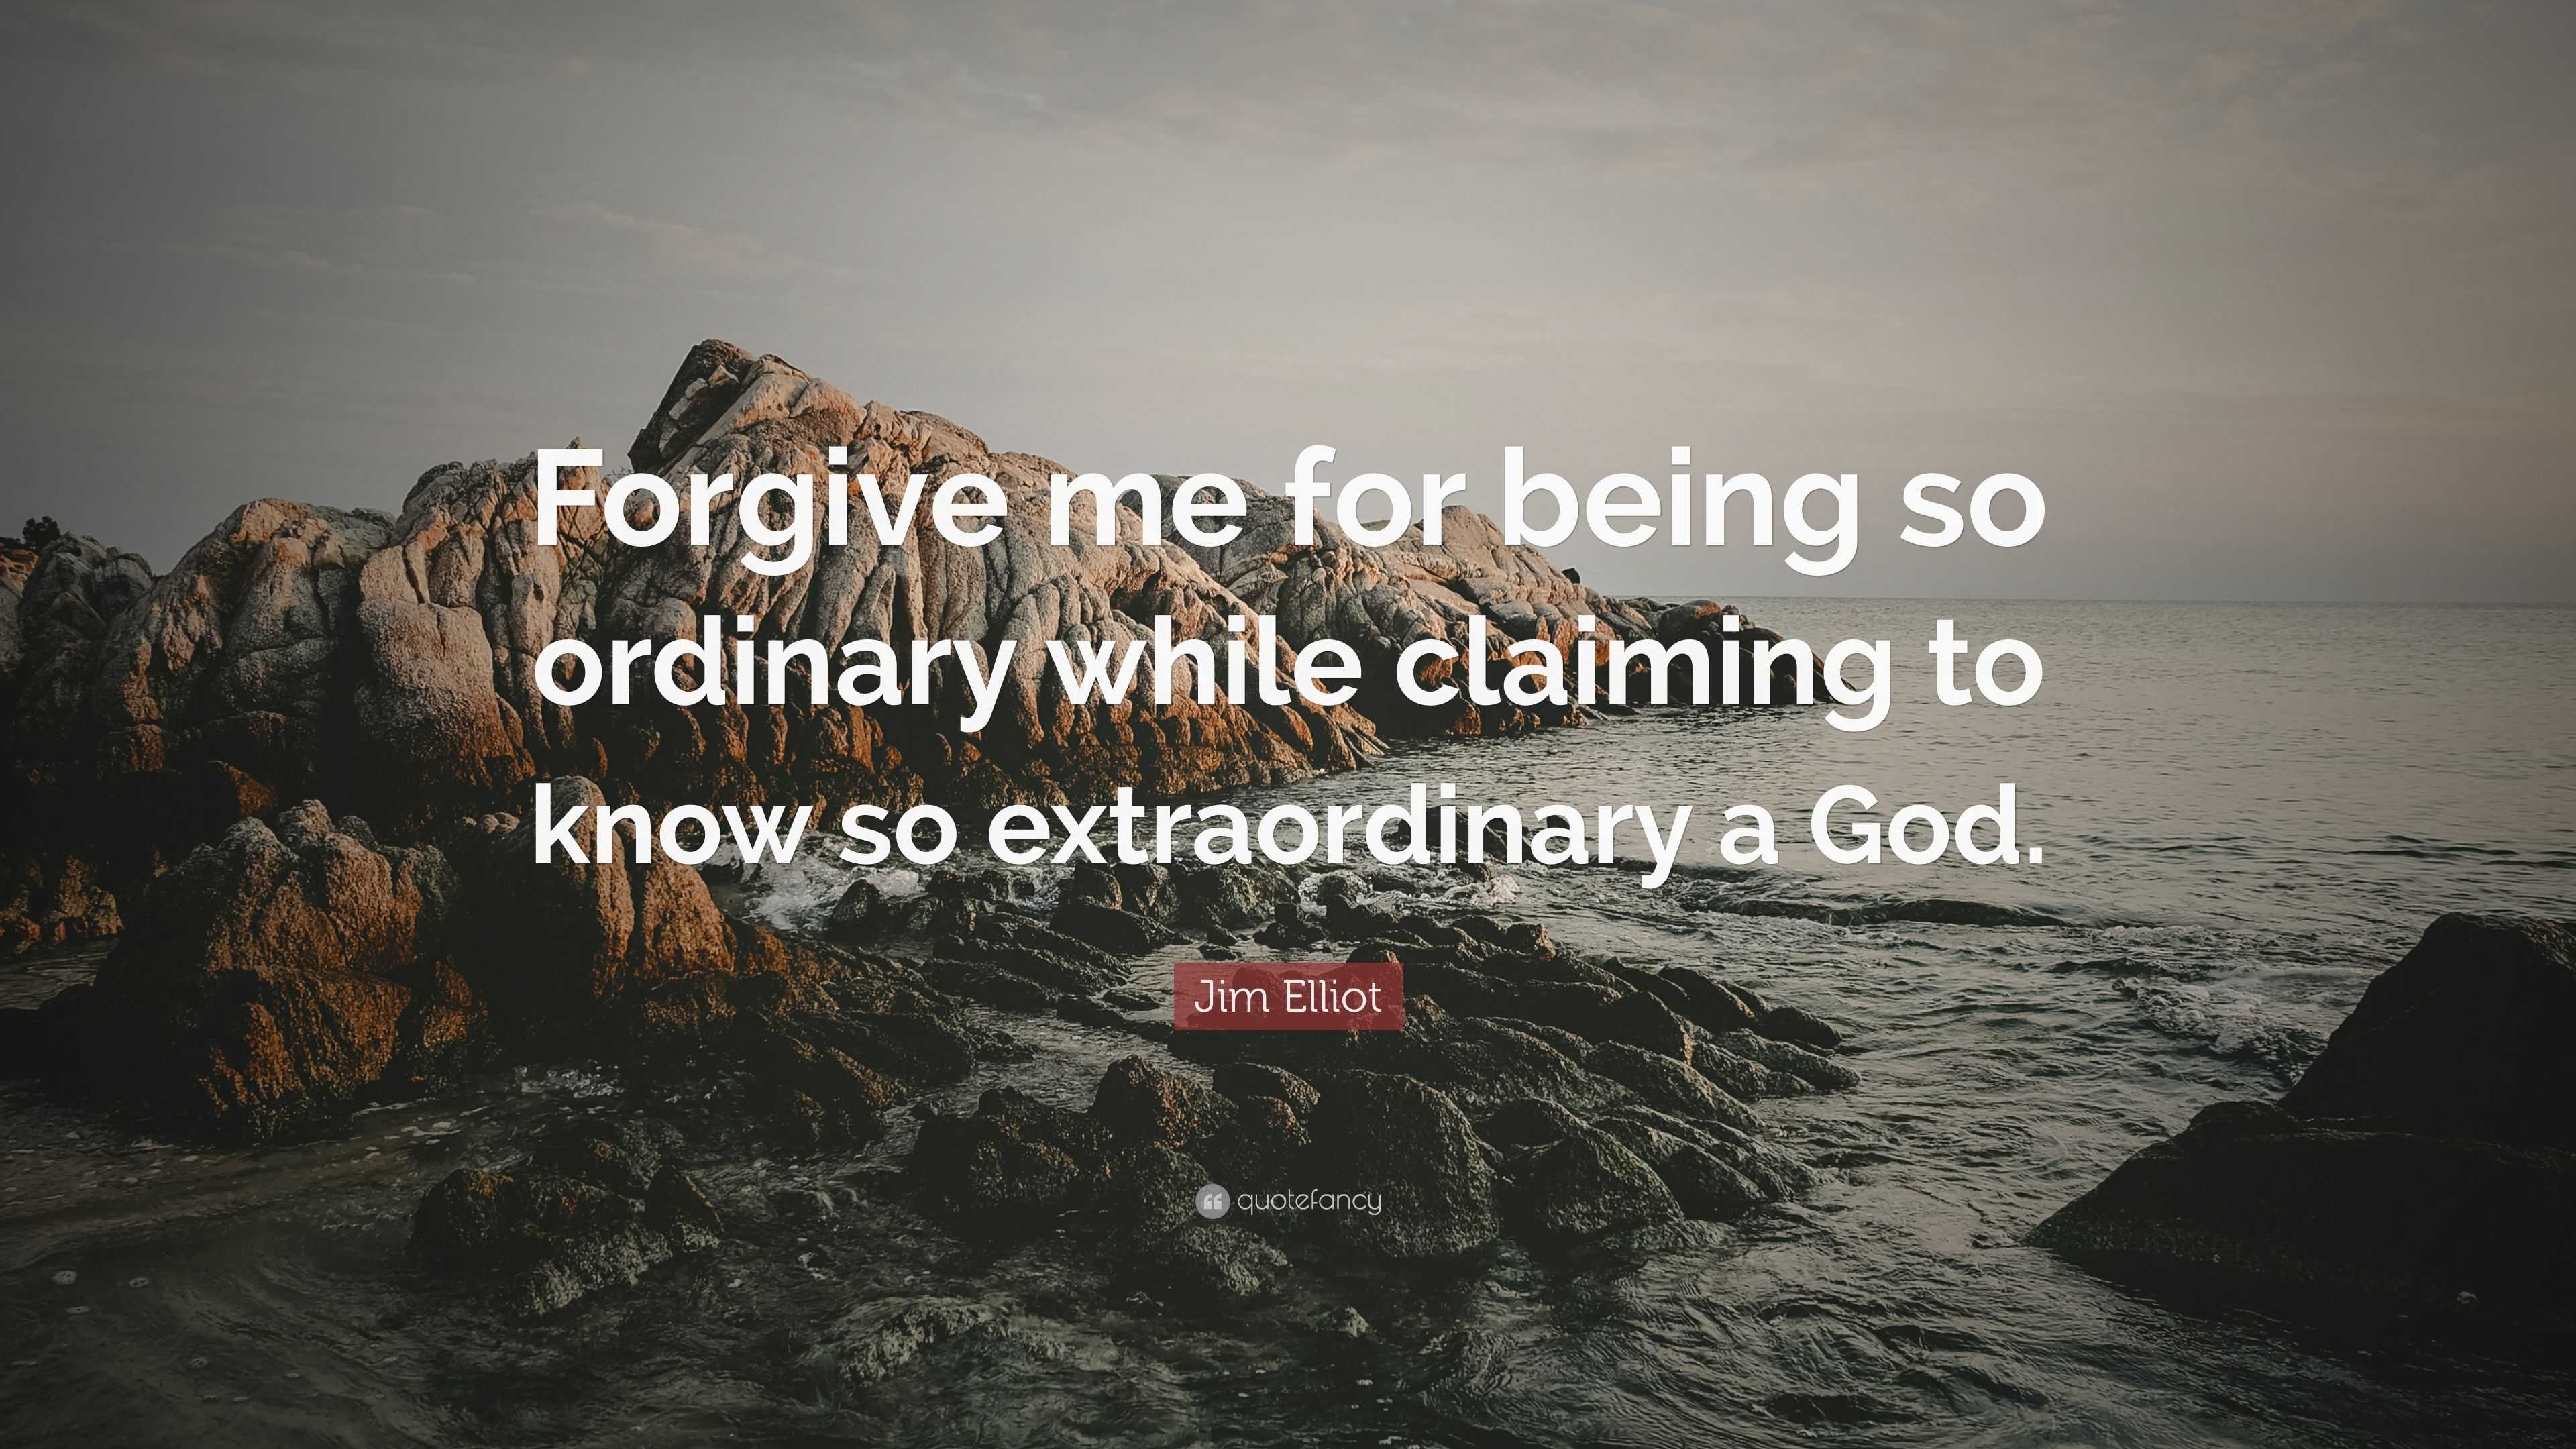 Jim Elliot Quote “forgive Me For Being So Ordinary While Claiming To Know So Extraordinary A God”